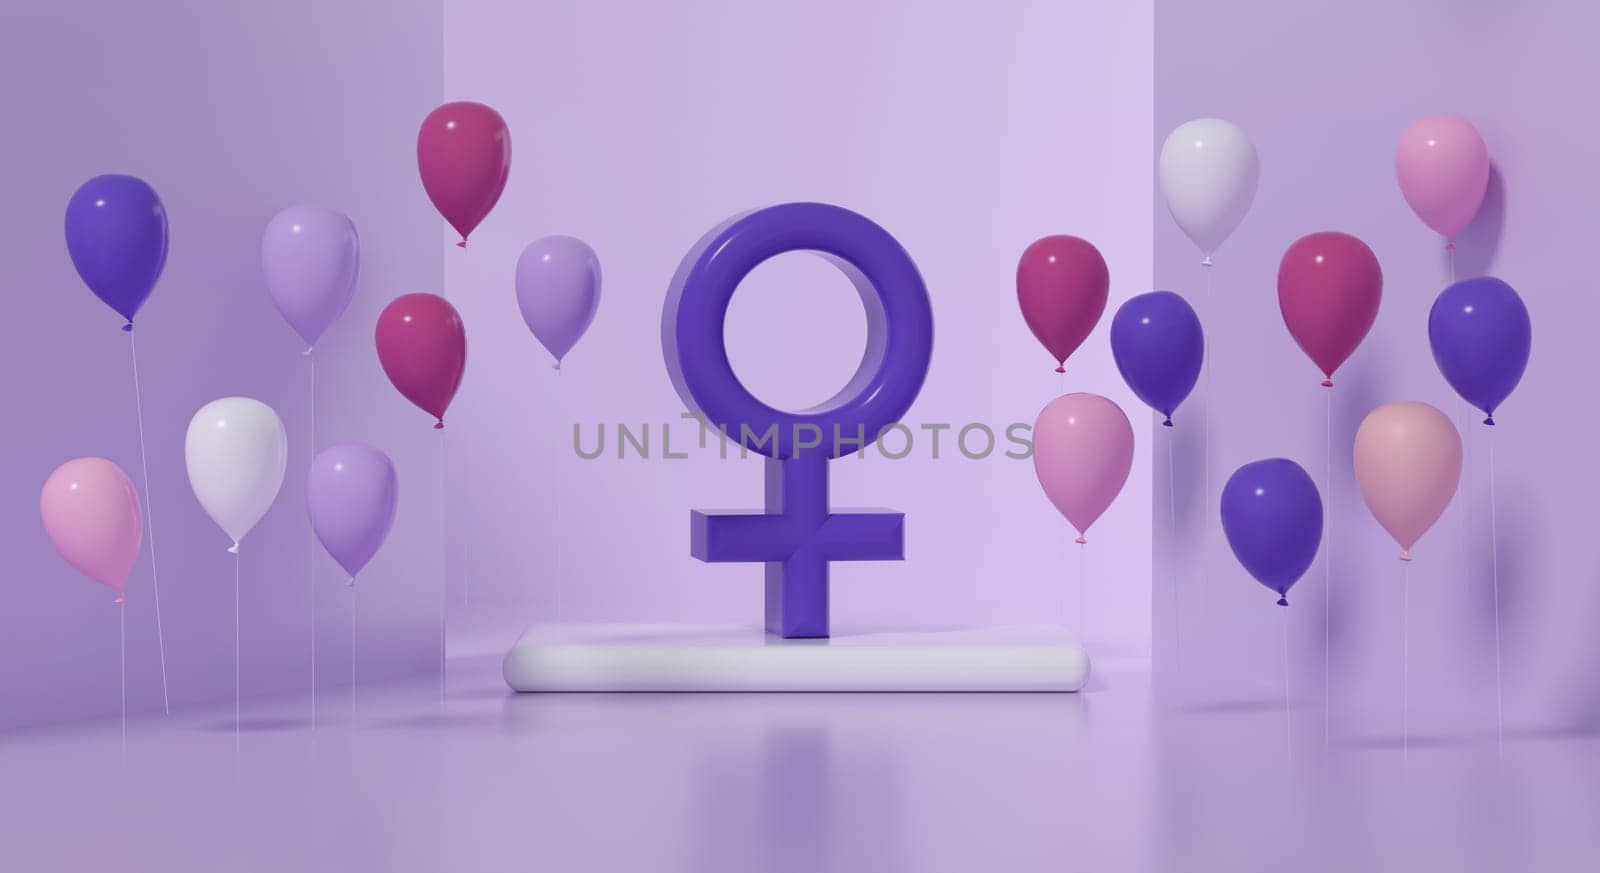 Celebration of women's day, celebration podium with symbol of woman with balloons on purple background. Party, festival, women. Representation in 3D.